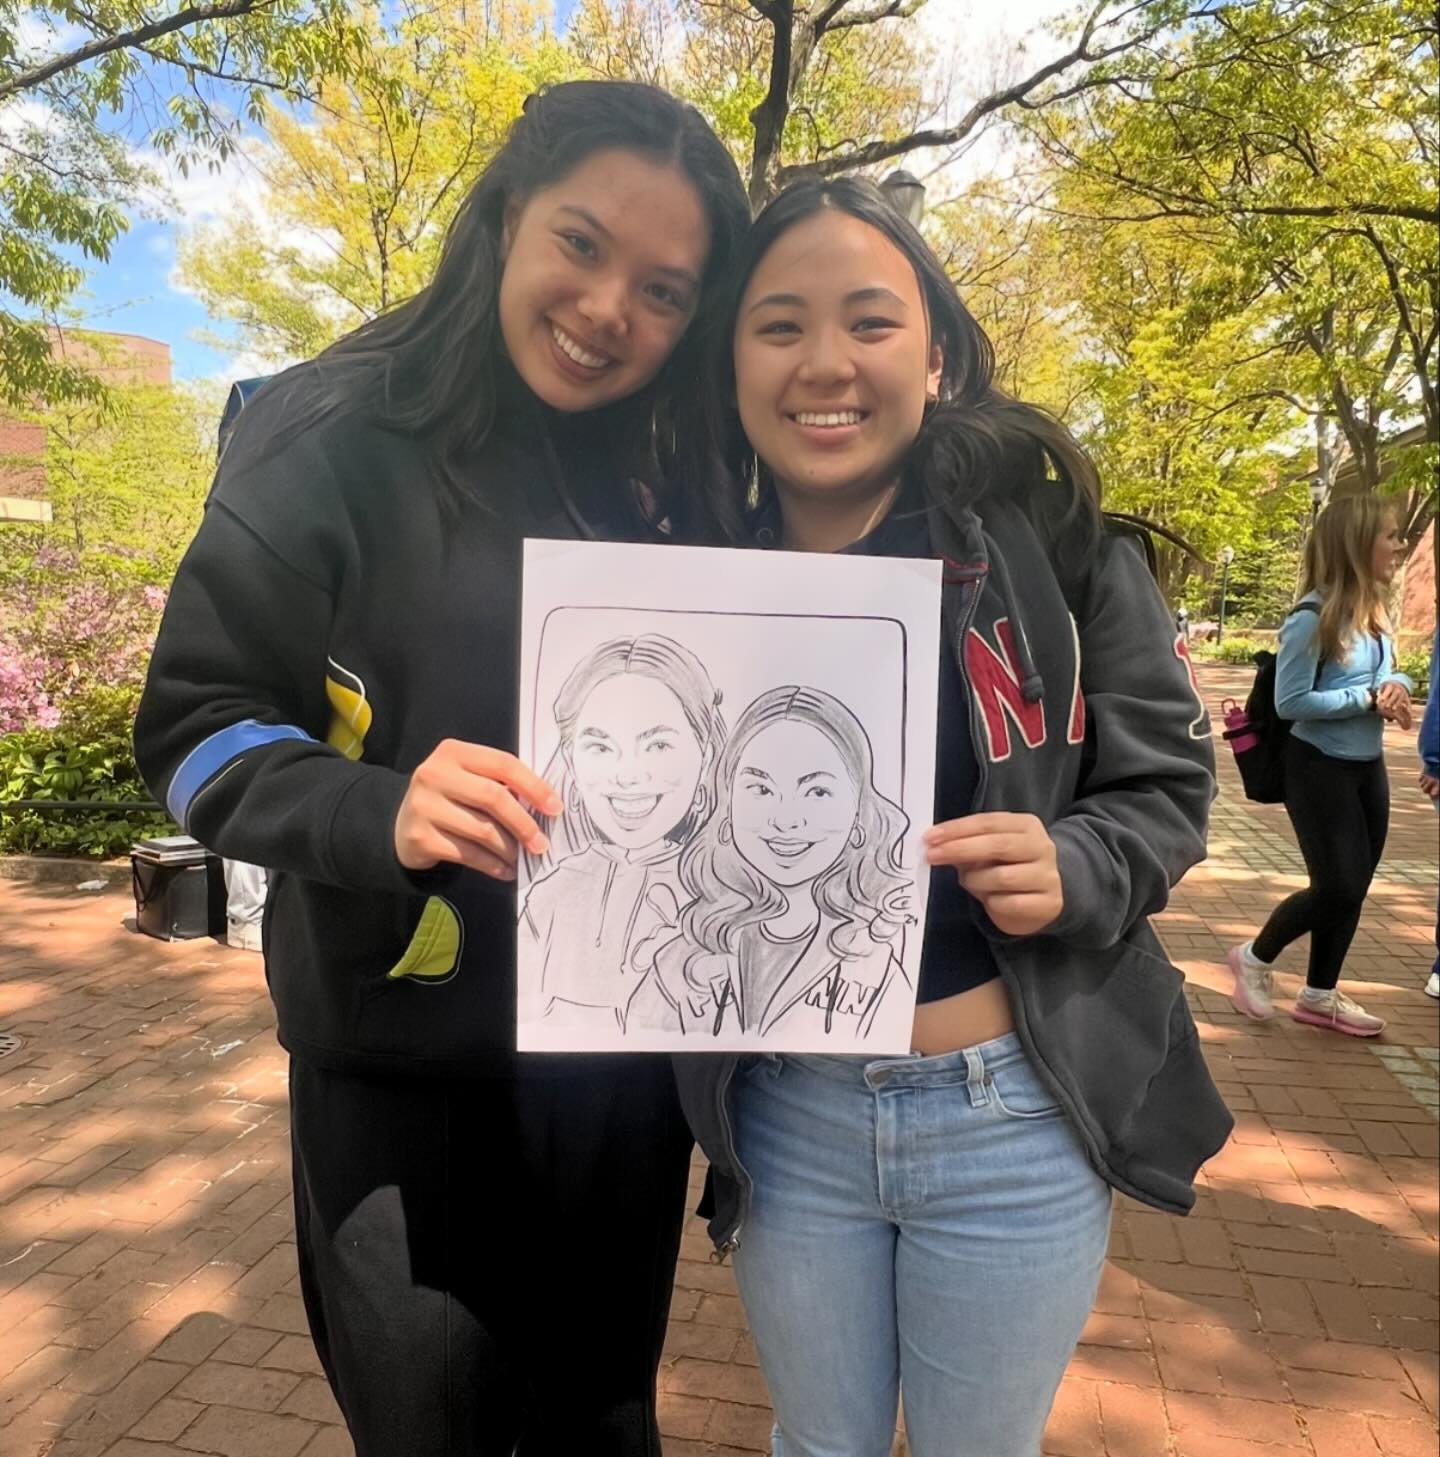 Thanks soo much to Penn for having me outside to draw for the School of Social Policy and Practice! Absolutely gorgeous day and the students were literally the sweetest!! &hearts;️ 
.
.
.
.
#caricaturesbycourtney #girlswhodraw #ipadartist #caricaturi